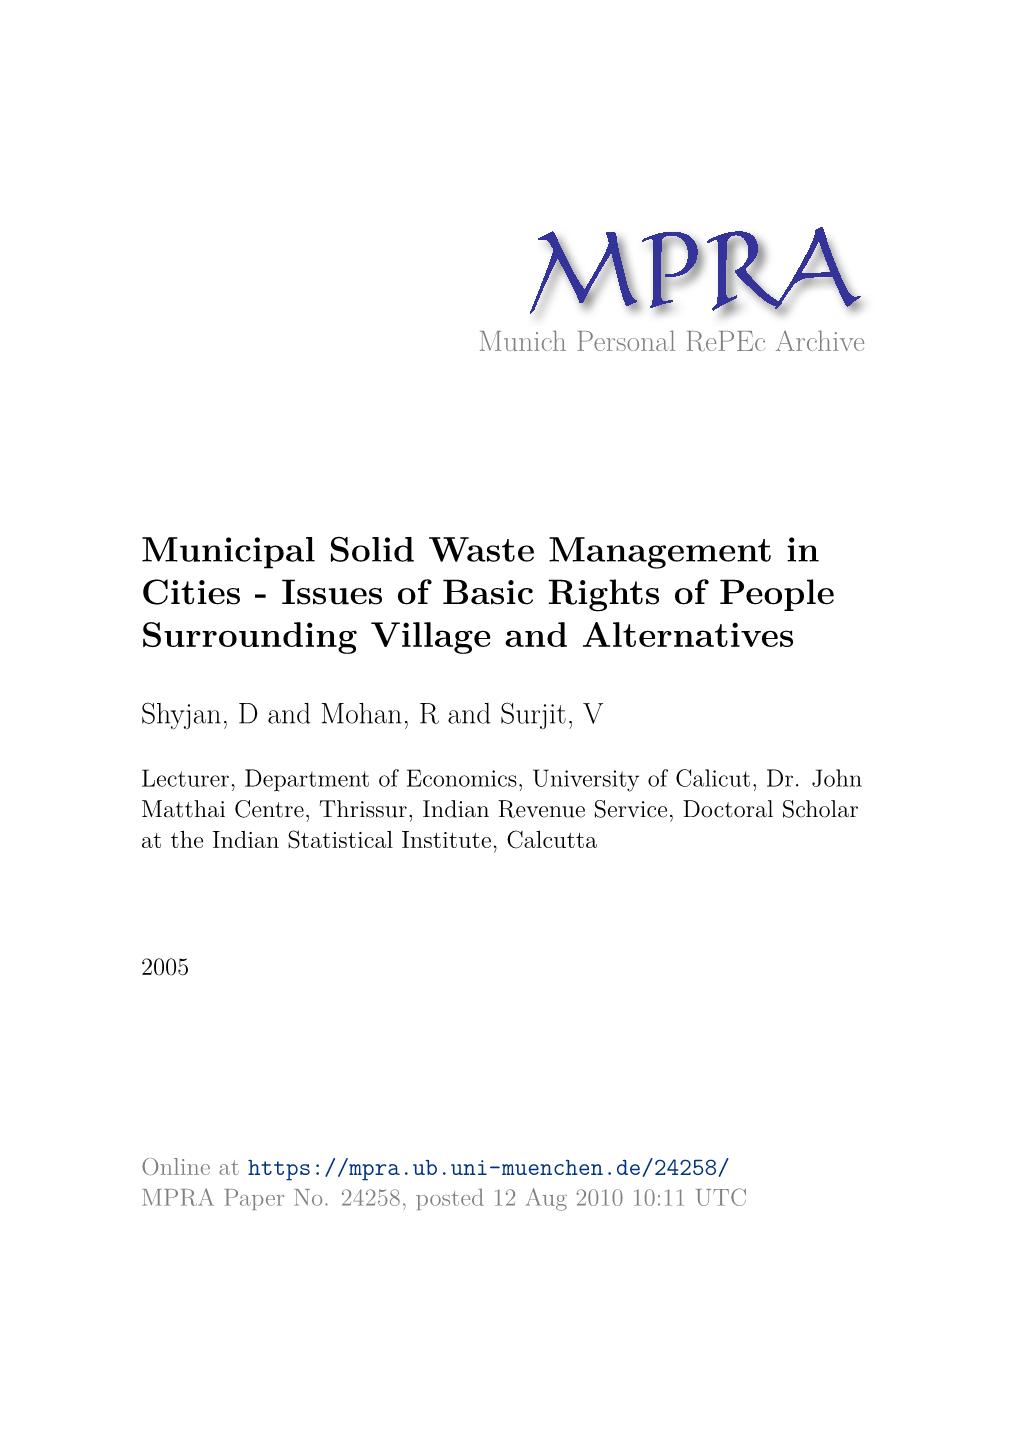 Municipal Solid Waste Management in Cities - Issues of Basic Rights of People Surrounding Village and Alternatives